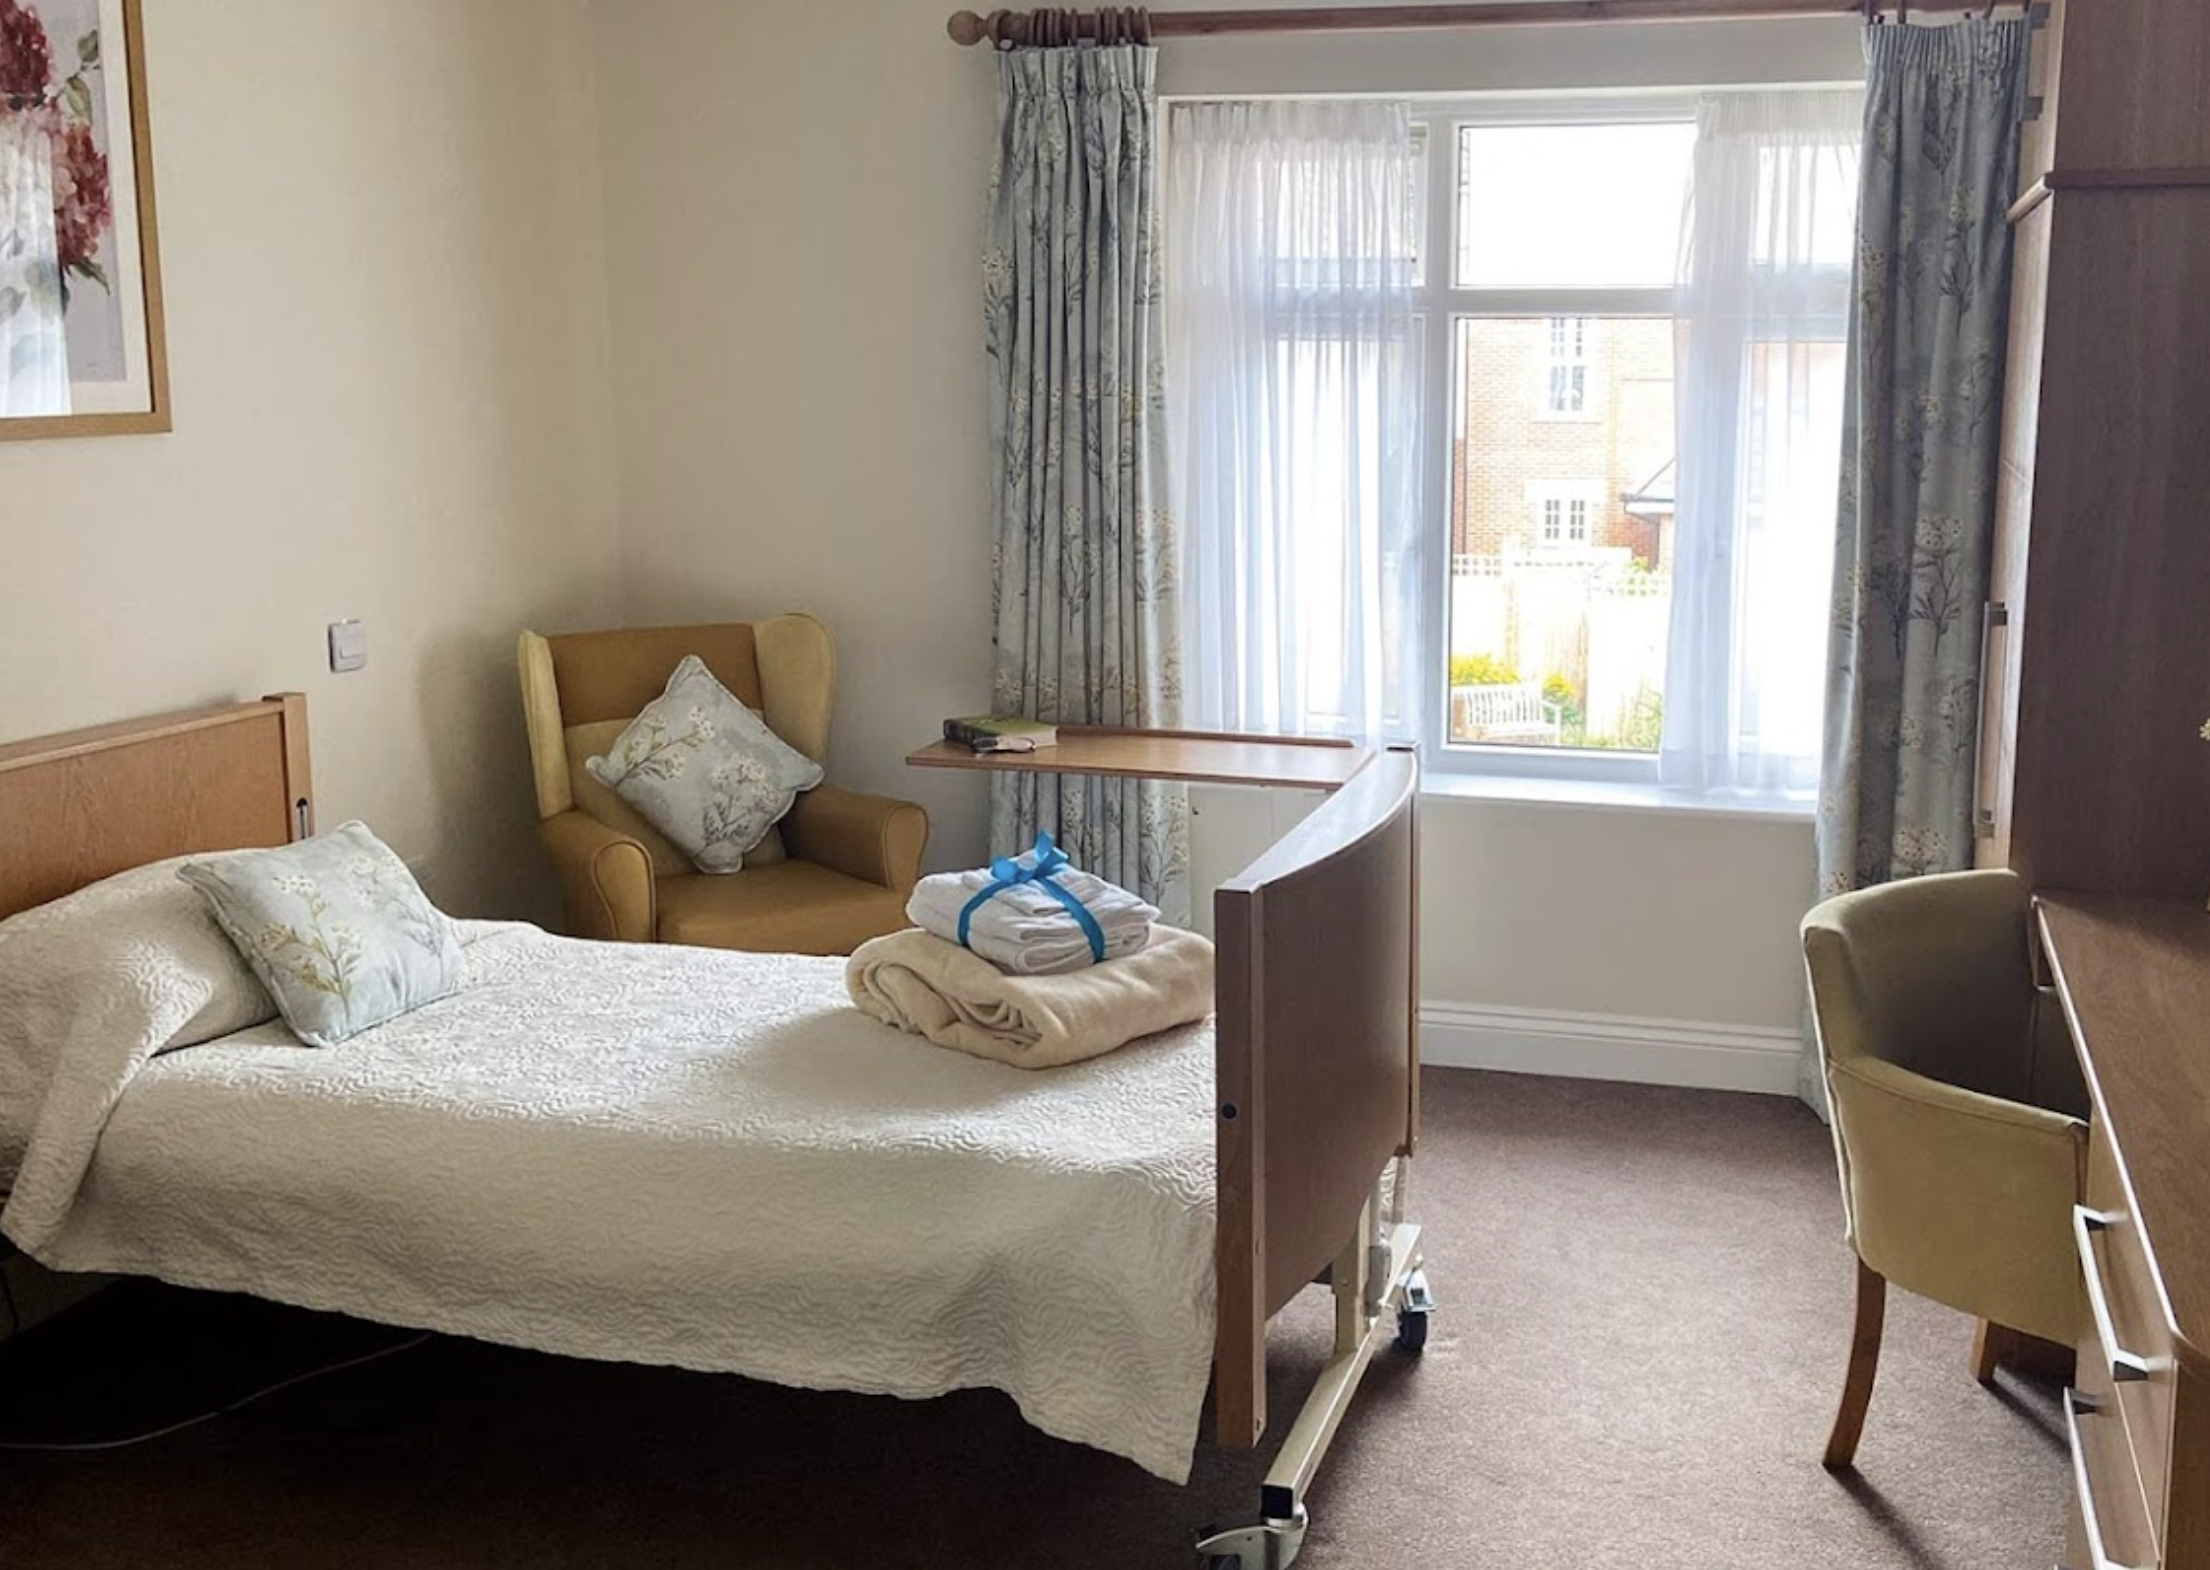 Bedroom of Alexandra House care home in Poole, Hampshire